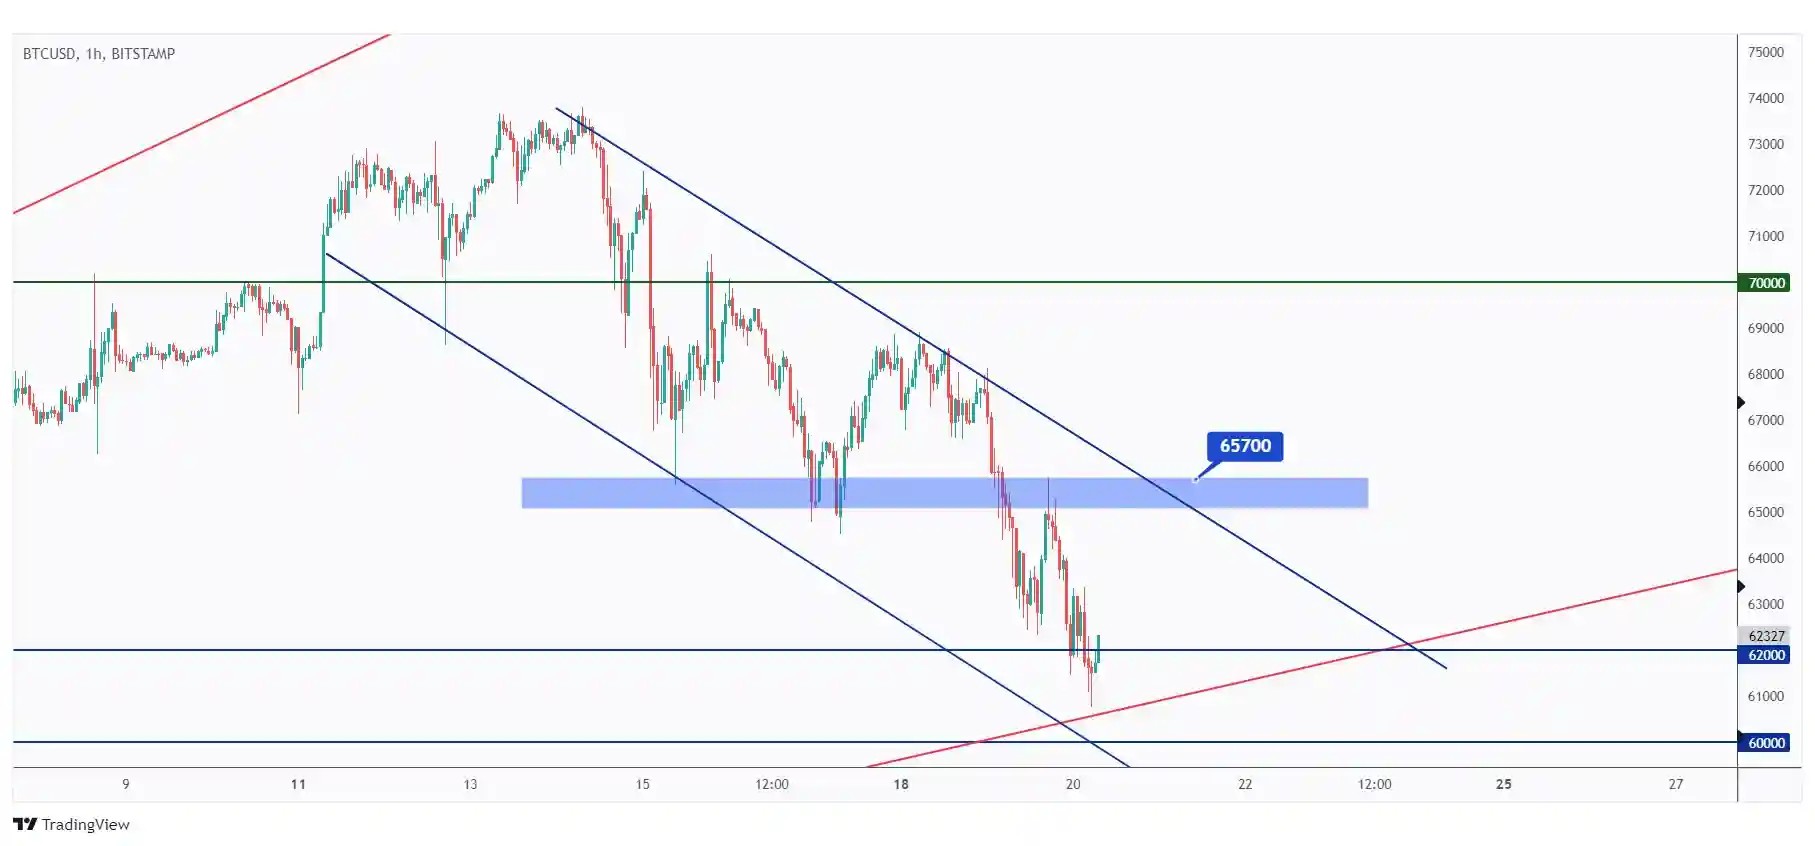 BTC 1h chart overall bearish from a short-term perspective trading within the falling channel.